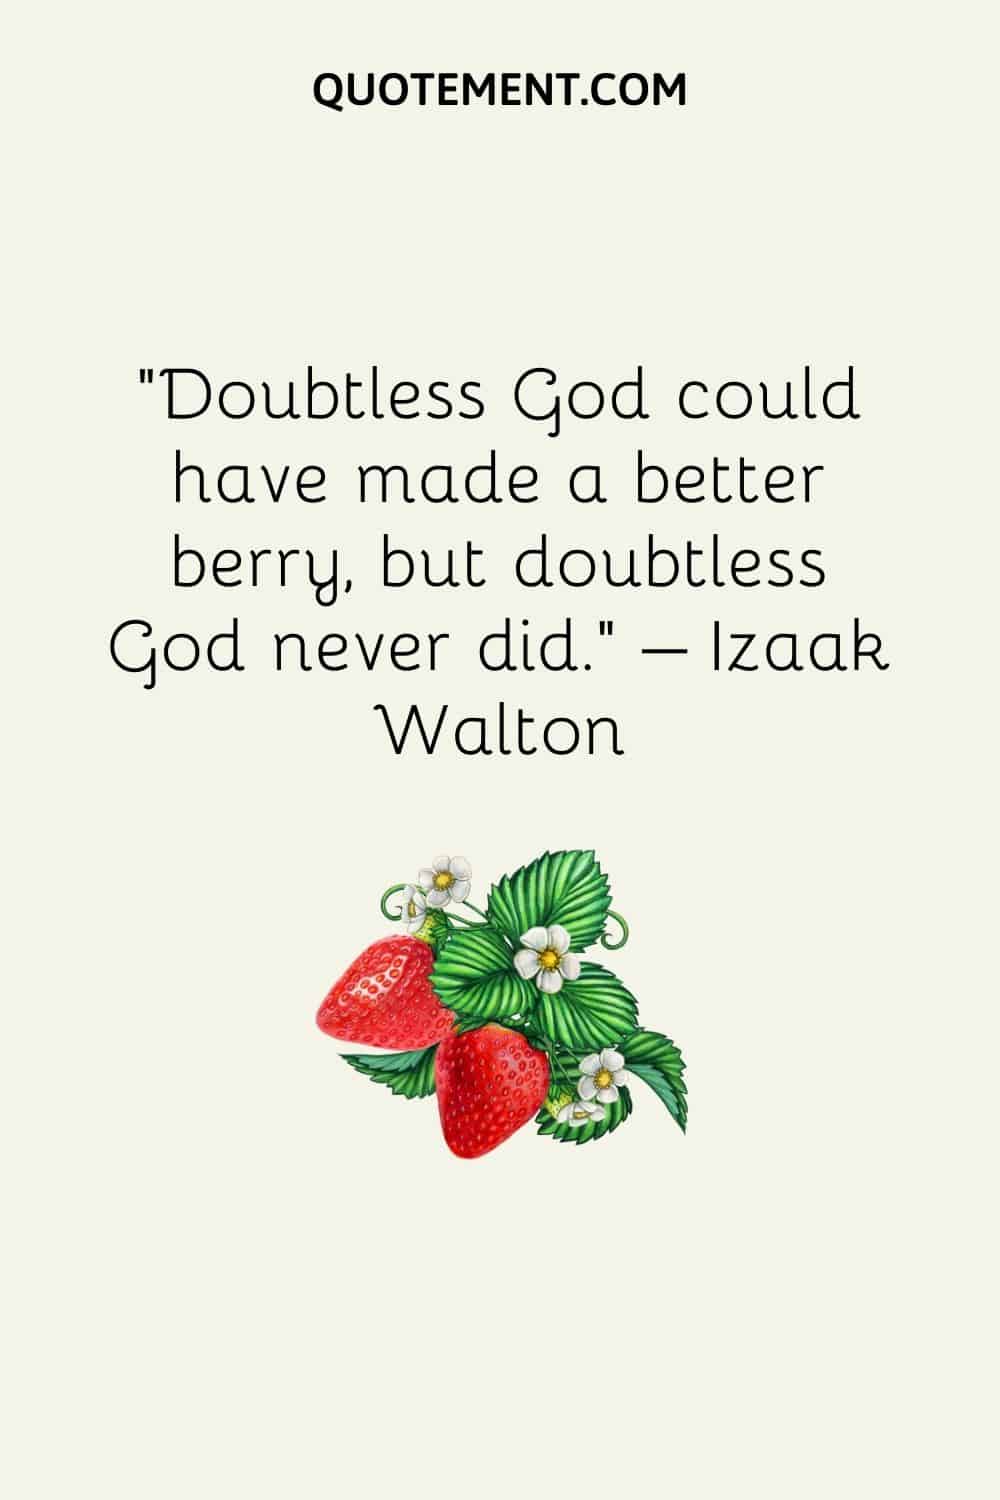 Doubtless God could have made a better berry, but doubtless God never did